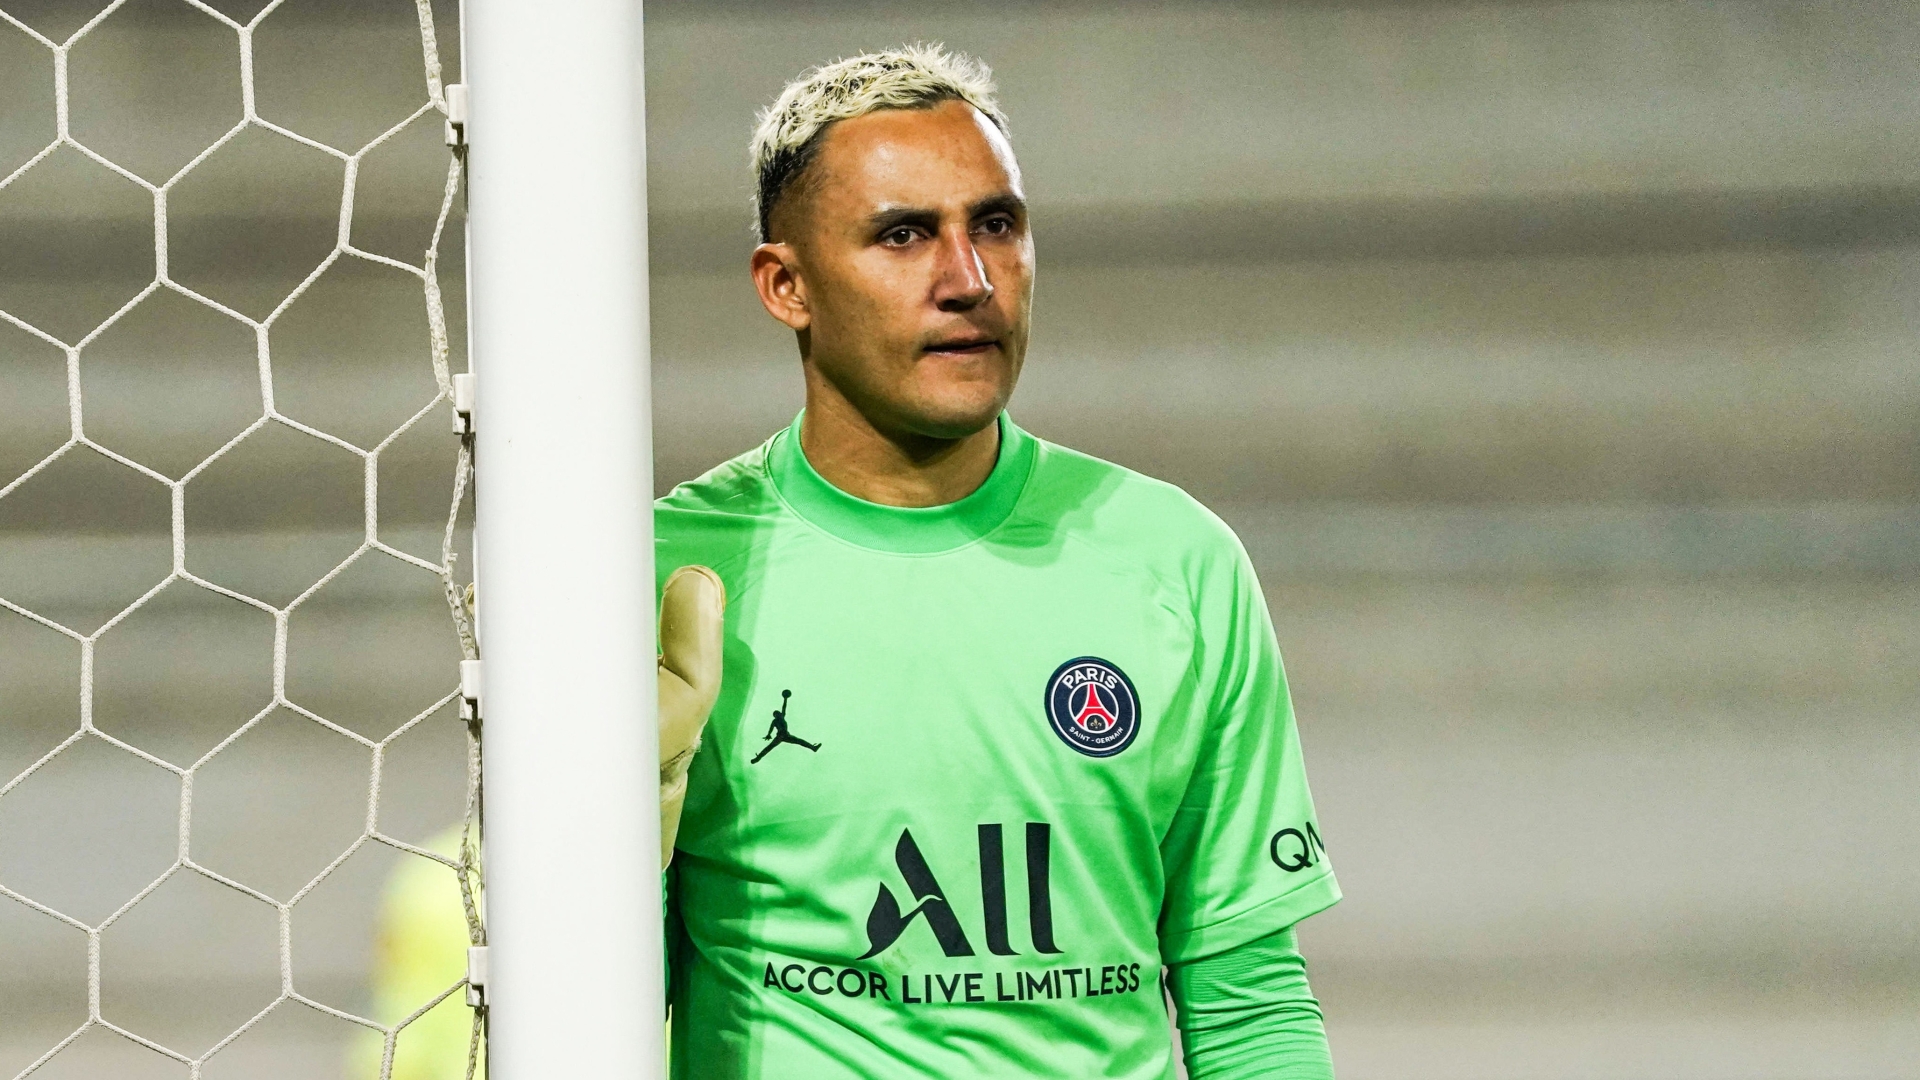 Newcastle ‘want PSG goalkeeper Navas transfer but face competition'